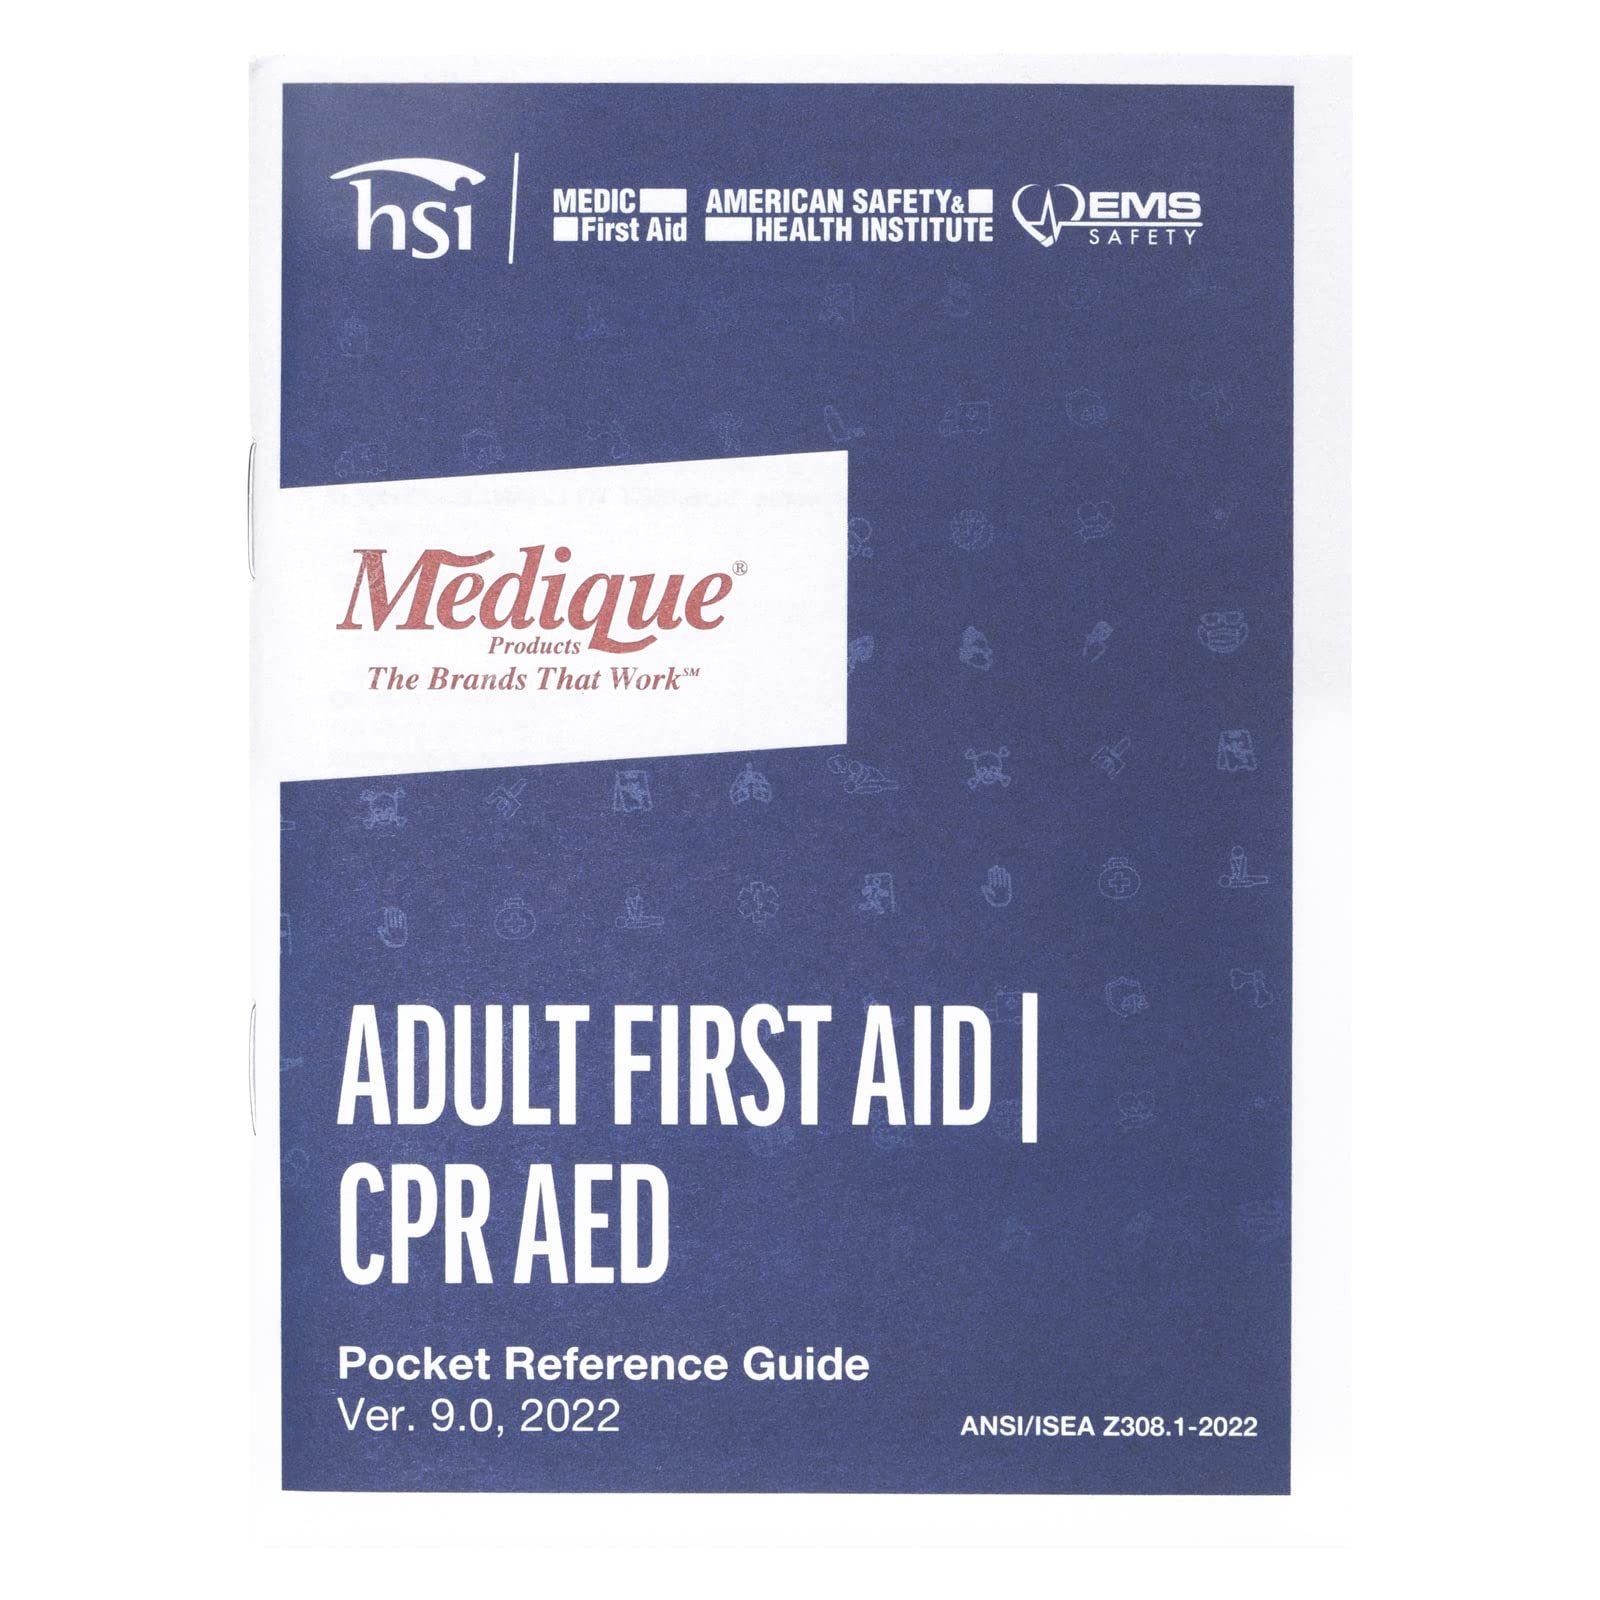 American Safety Health Institute FAGUIDE 37-Page First Aid Guide, Standard, Red/White/Blue